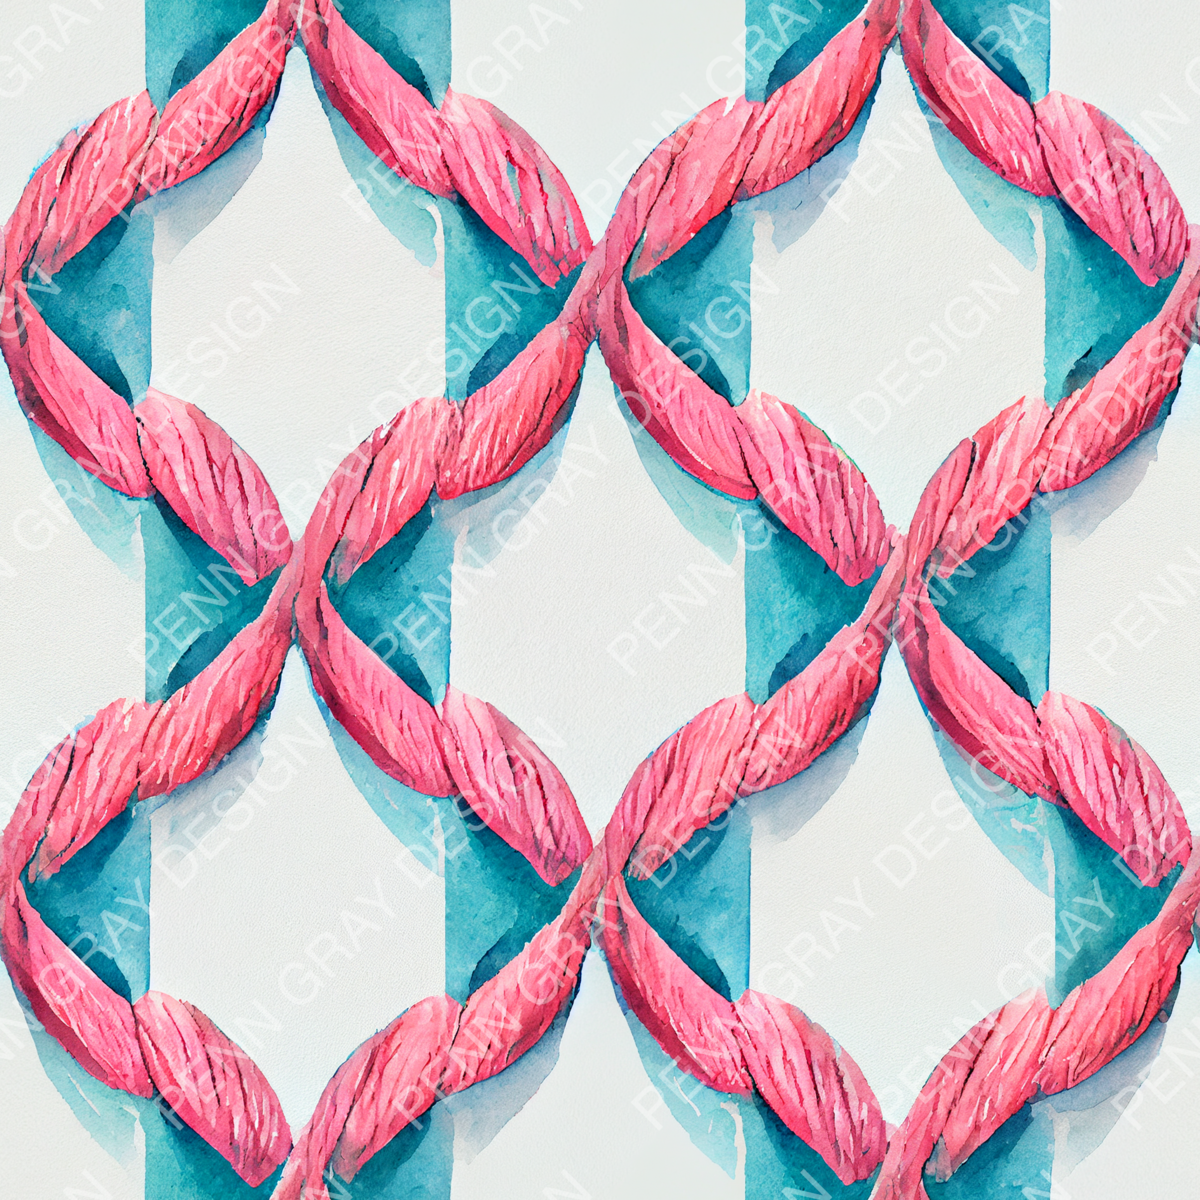 ropes-anchors-10-(watermarked)